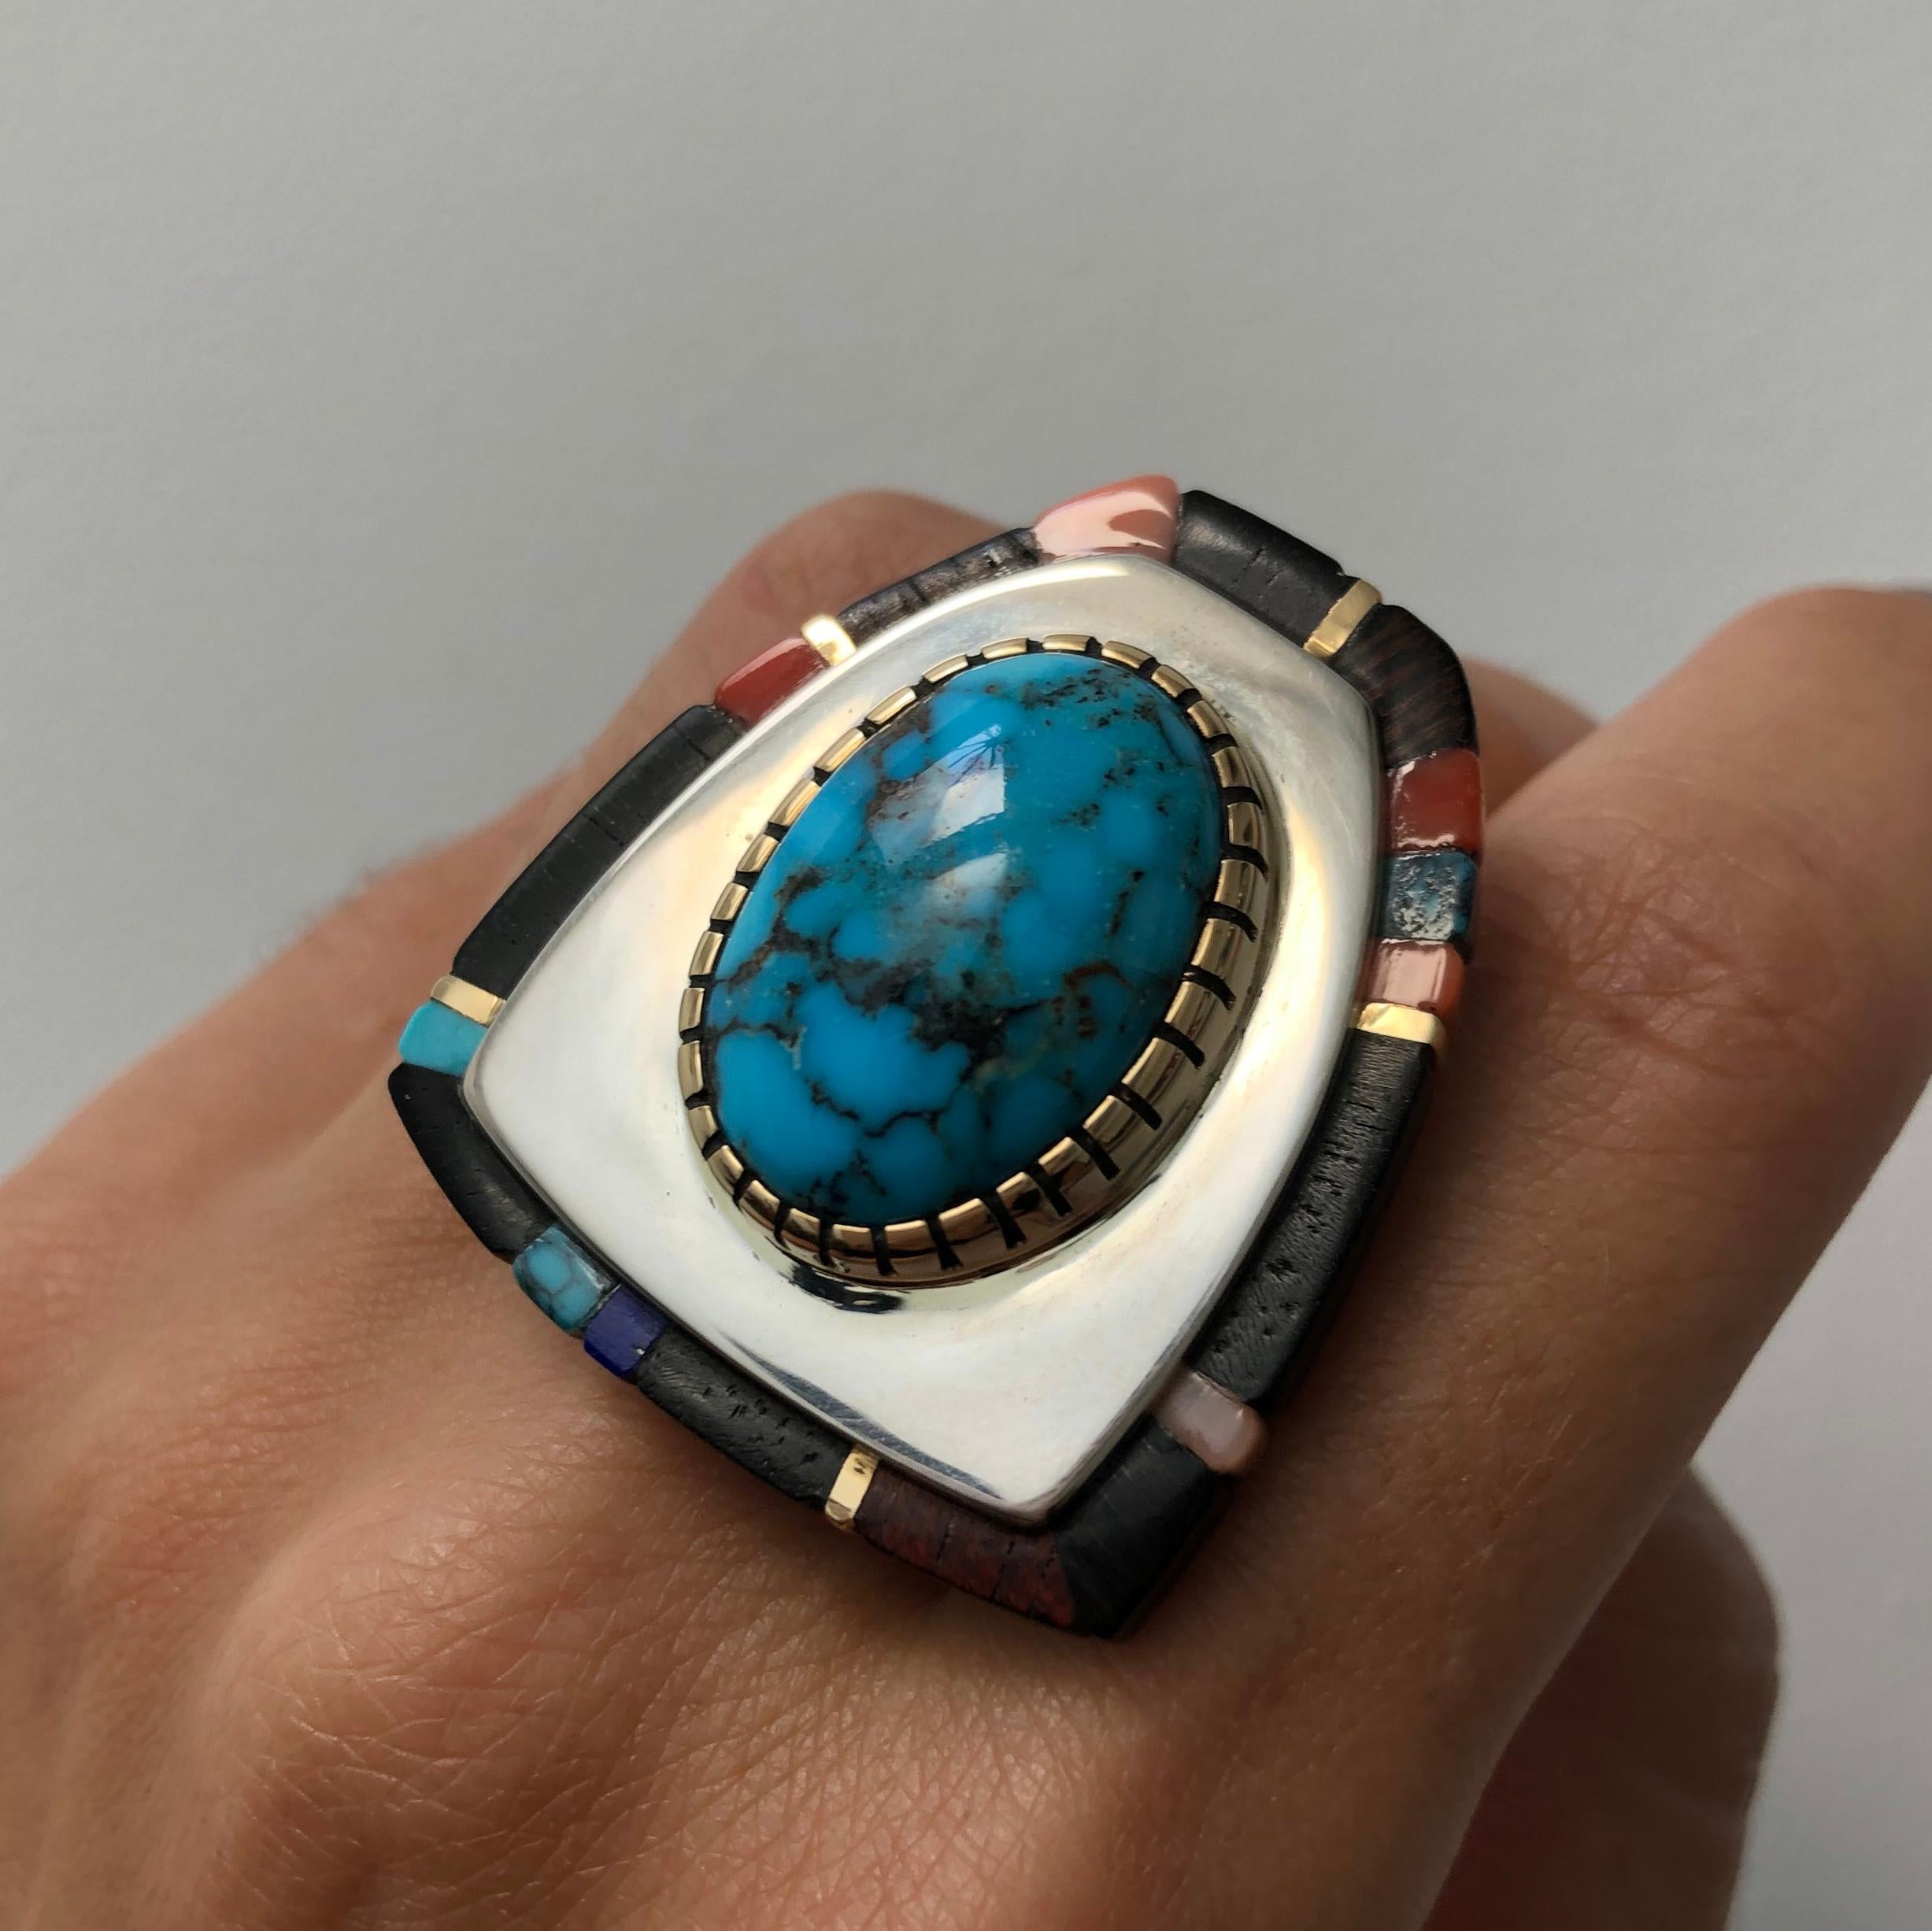 A Candelaria turquoise, lapis, ebony, coral, 18 karat gold and sterling silver ring, by master Hopi goldsmith Sonwai (Verma Nequatewa), 2017.  Signed Sonwai. Ring size 7.25. 

This rare turquoise cabochon comes from the Candelaria mines in